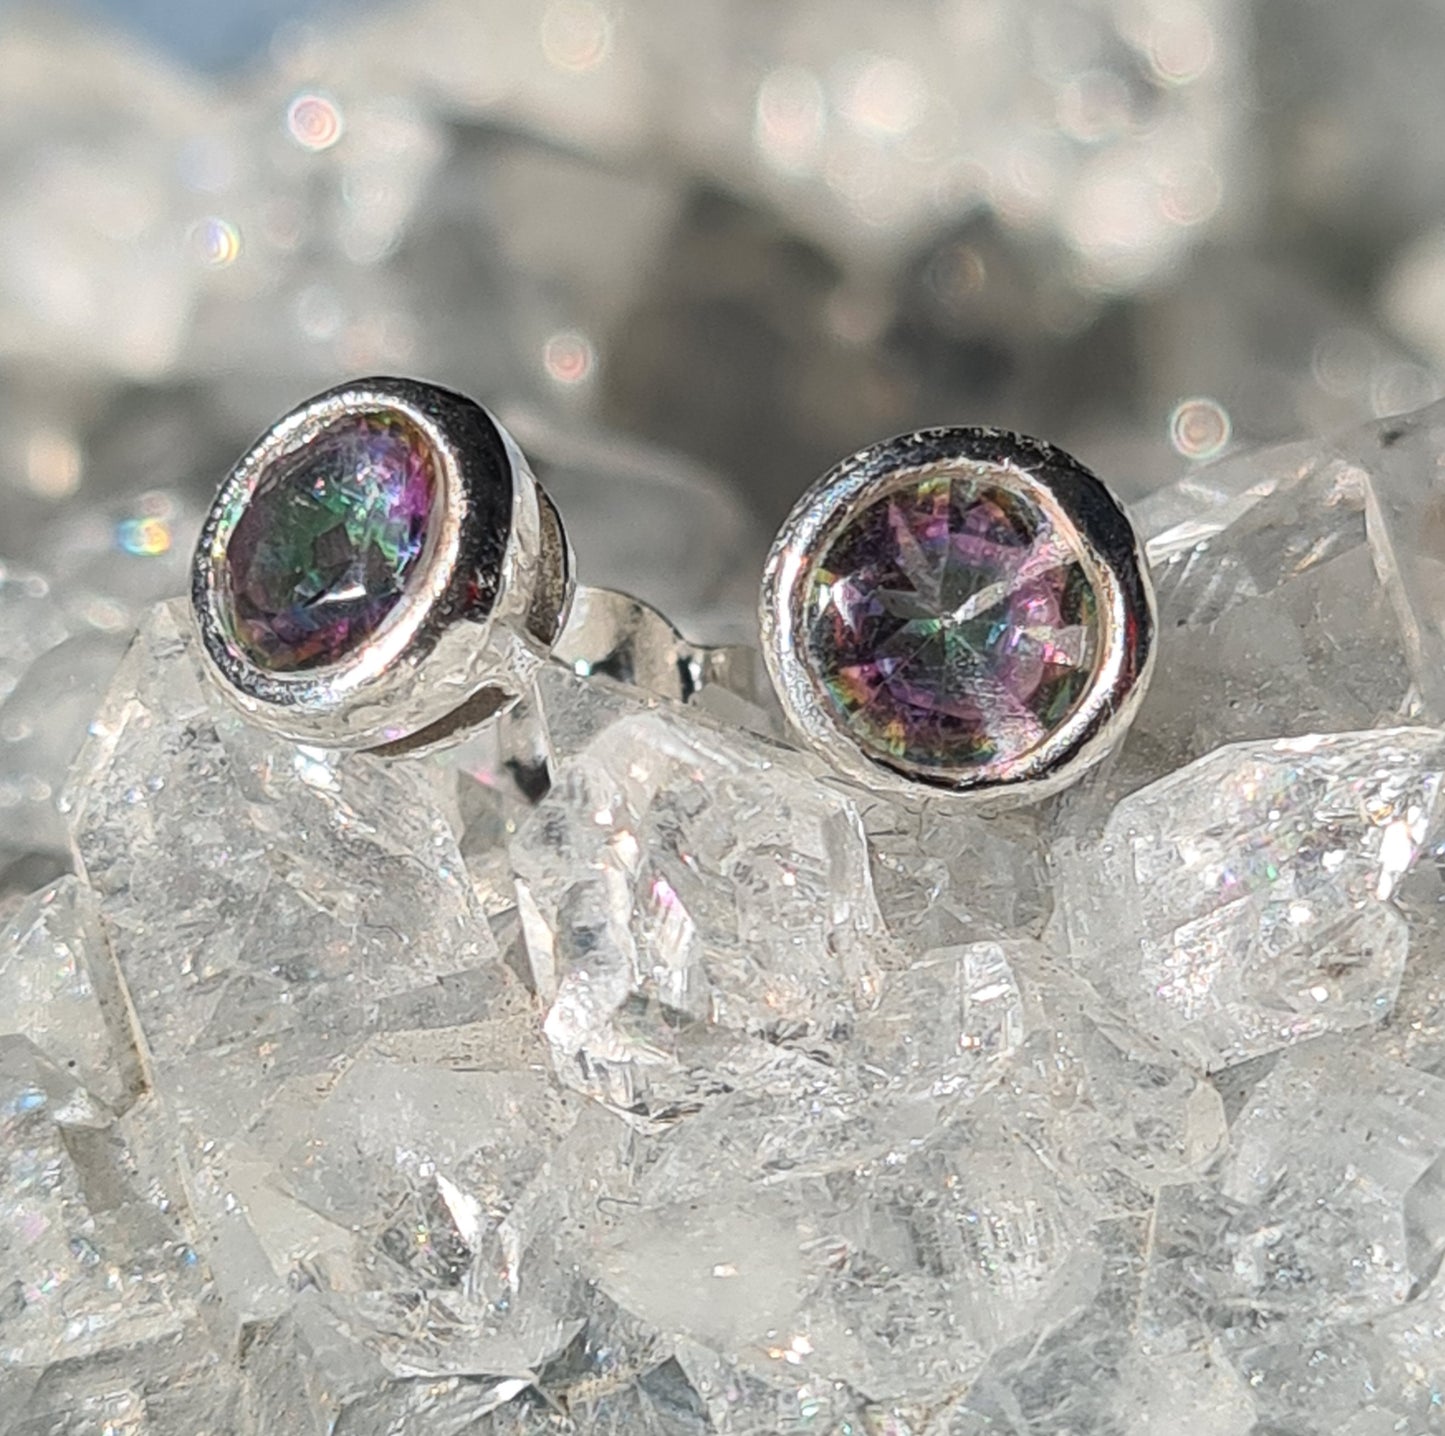 A pair of faceted mystic topaz set stud earrings in sterling silver. Shown on crystallised background.